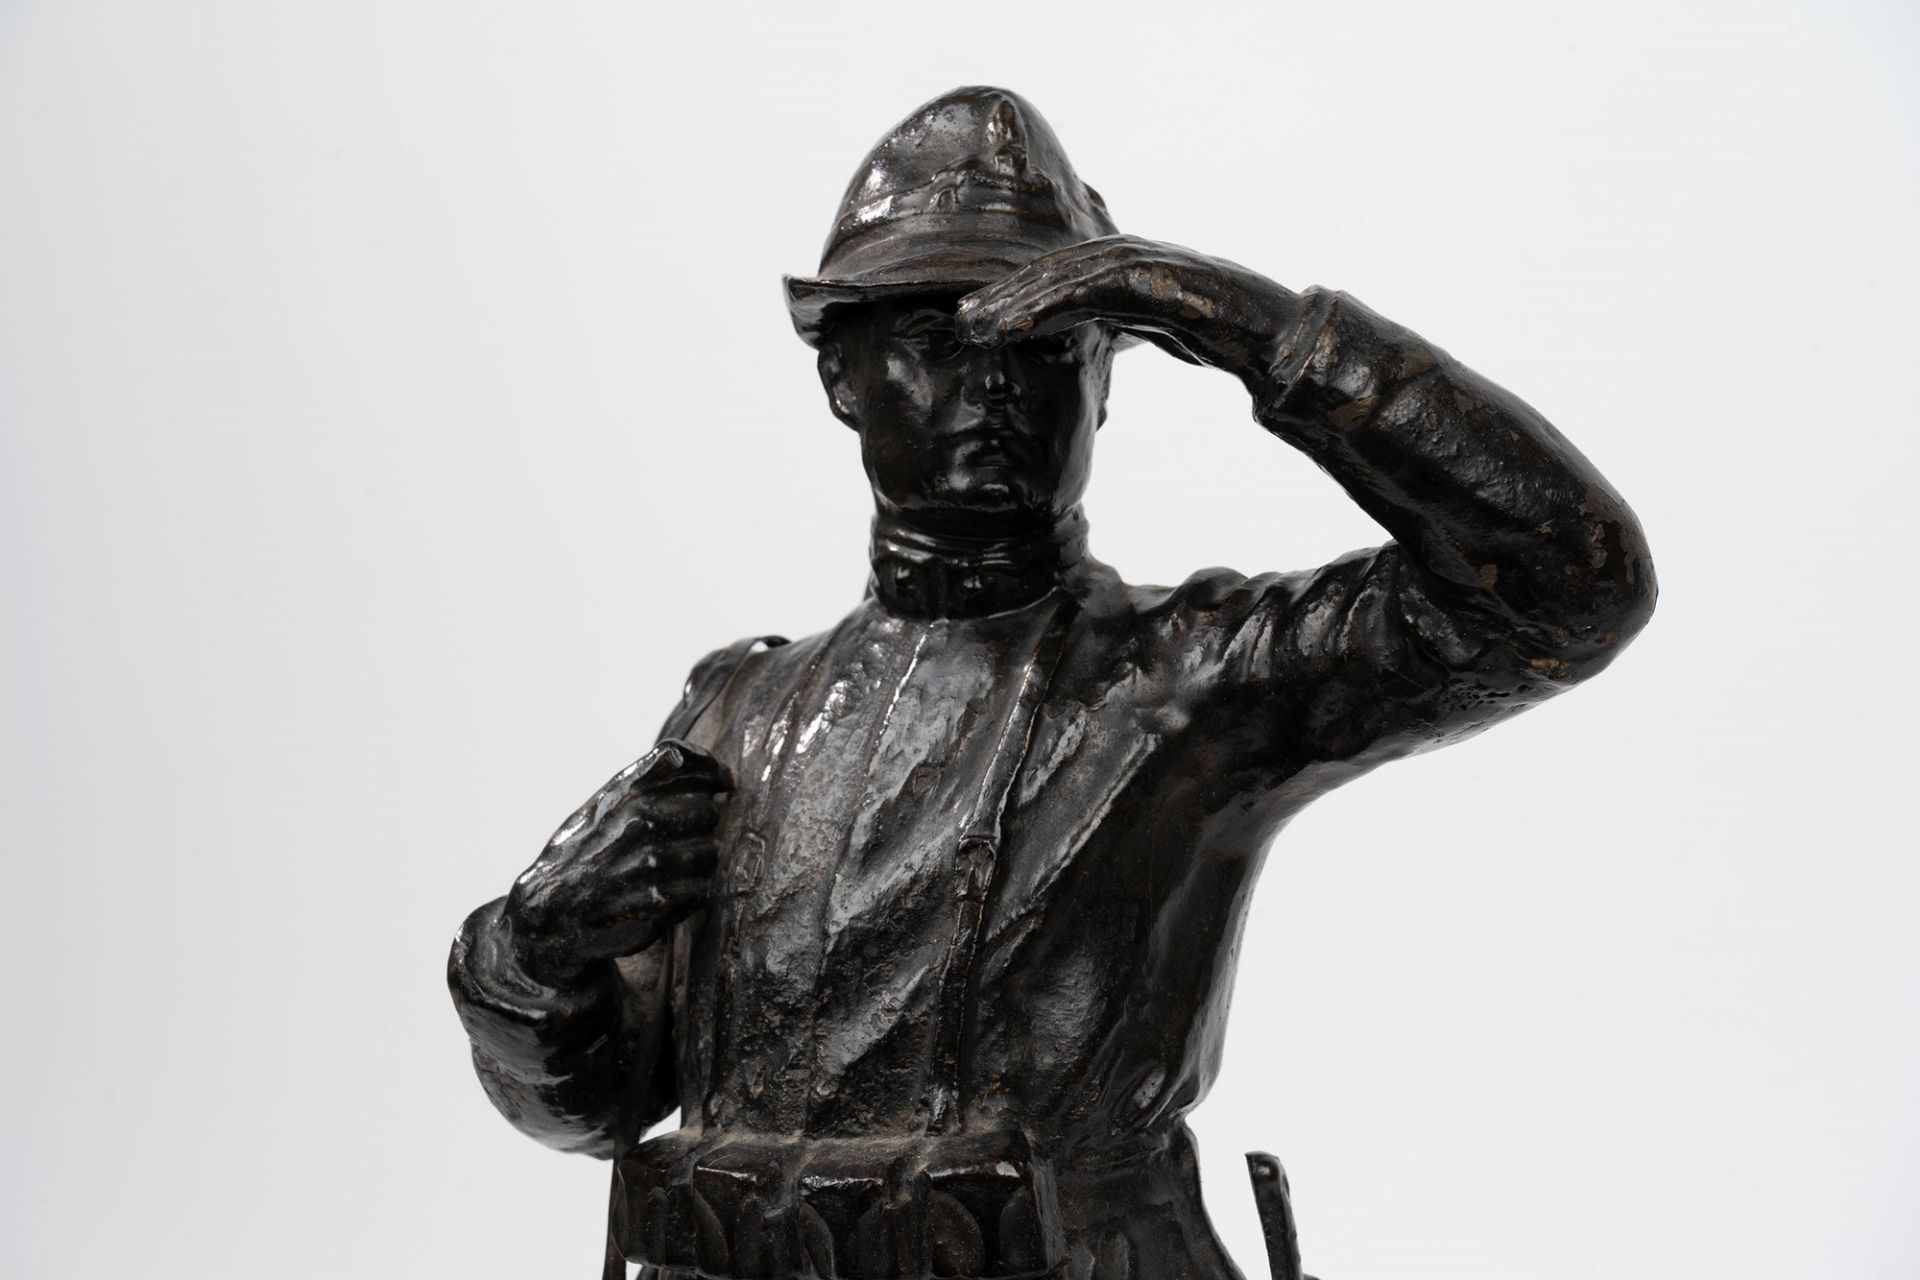 Dark patina bronze sculpture depicting a soldier from the Guardia di Finanza, early 20th century - Image 3 of 5